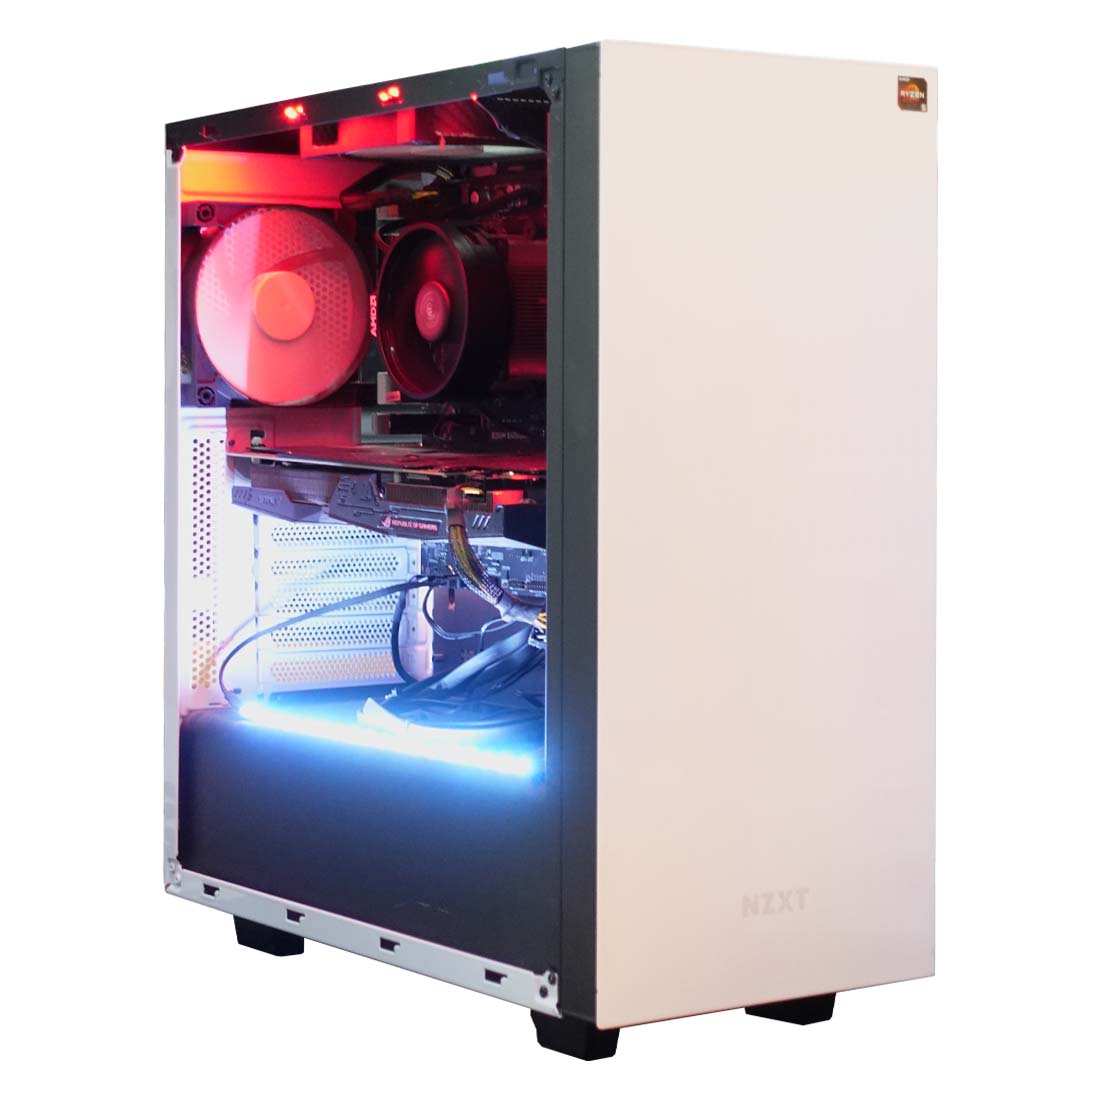 (Pre-Owned) Gaming PC AMD Ryzen 5 1500X & Asus GTX 1060 w/ NZXT Mid Tower - White - كمبيوتر مستعمل - Store 974 | ستور ٩٧٤